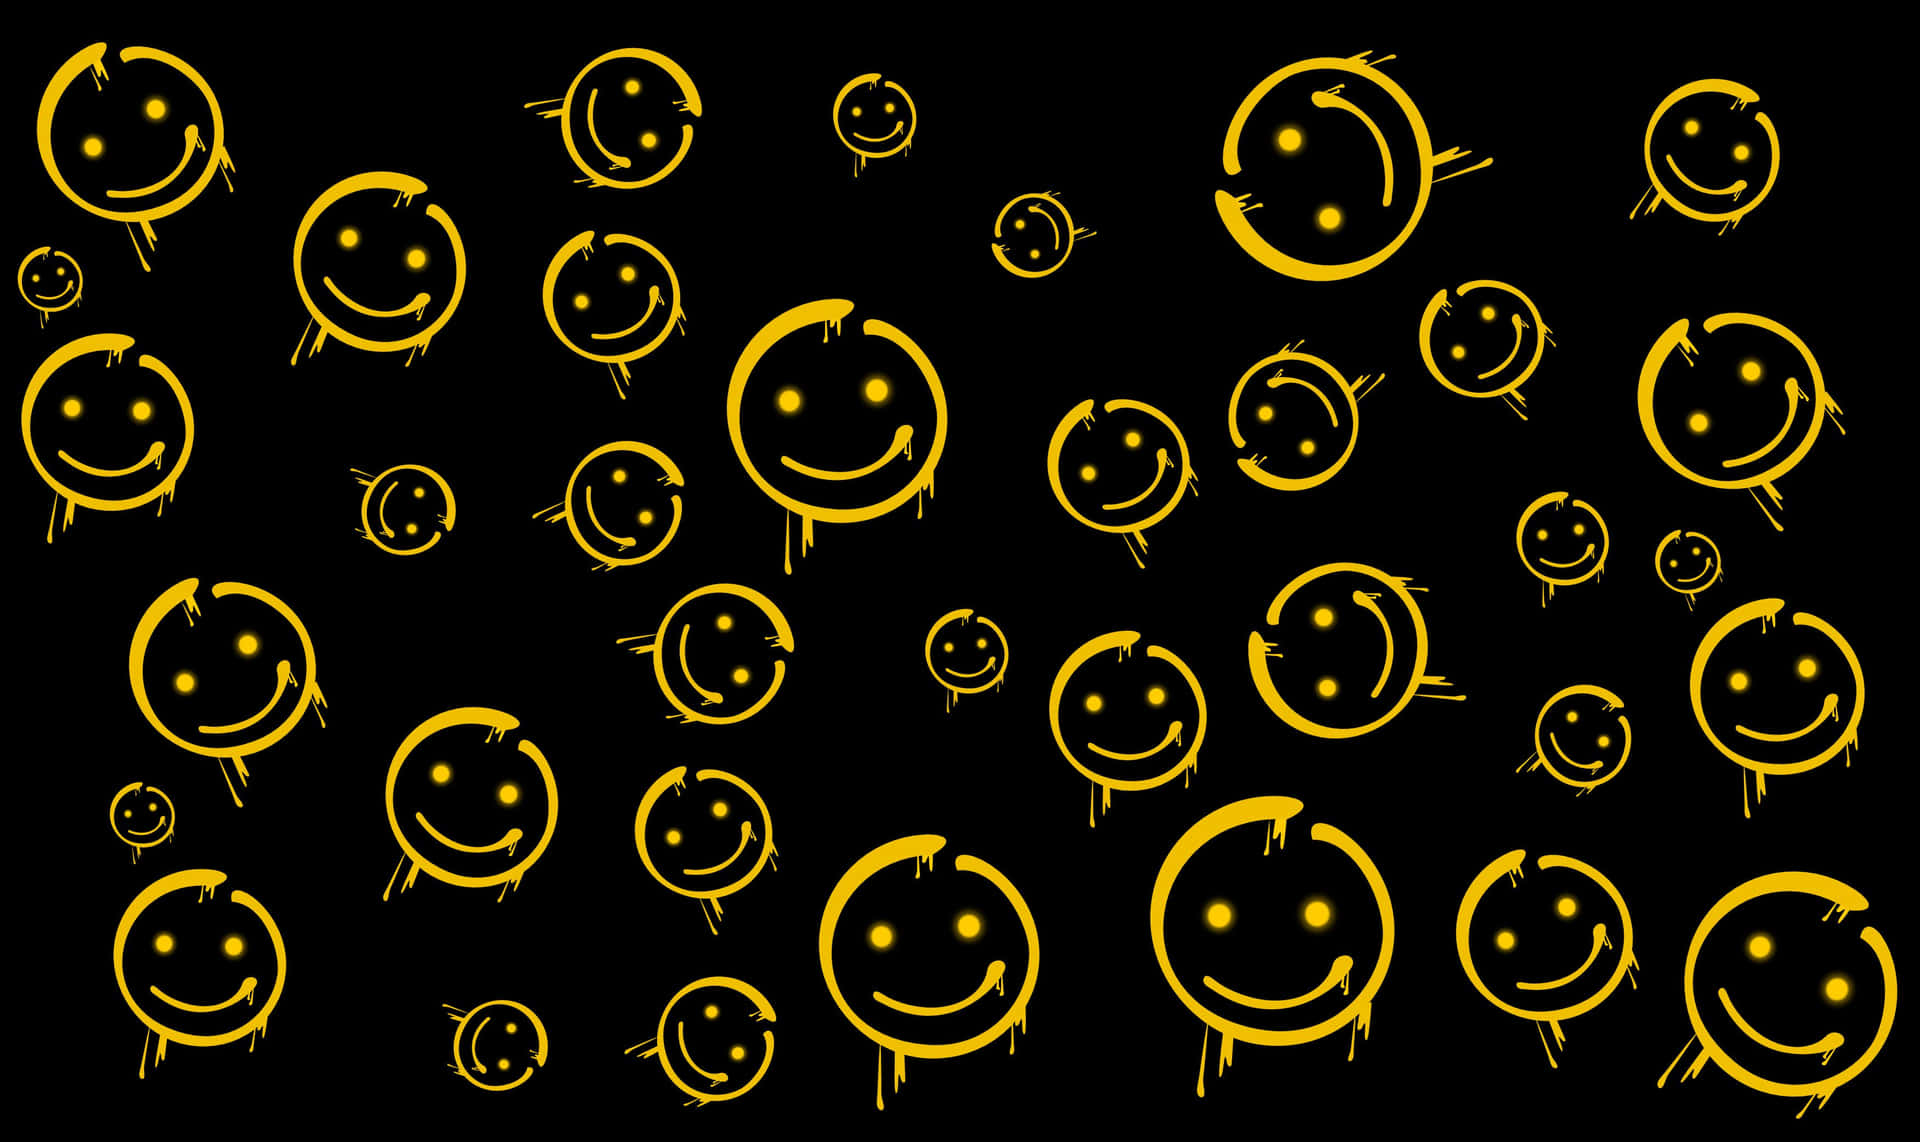 A cheery yellow Smiley Face to bring a smile to your day.